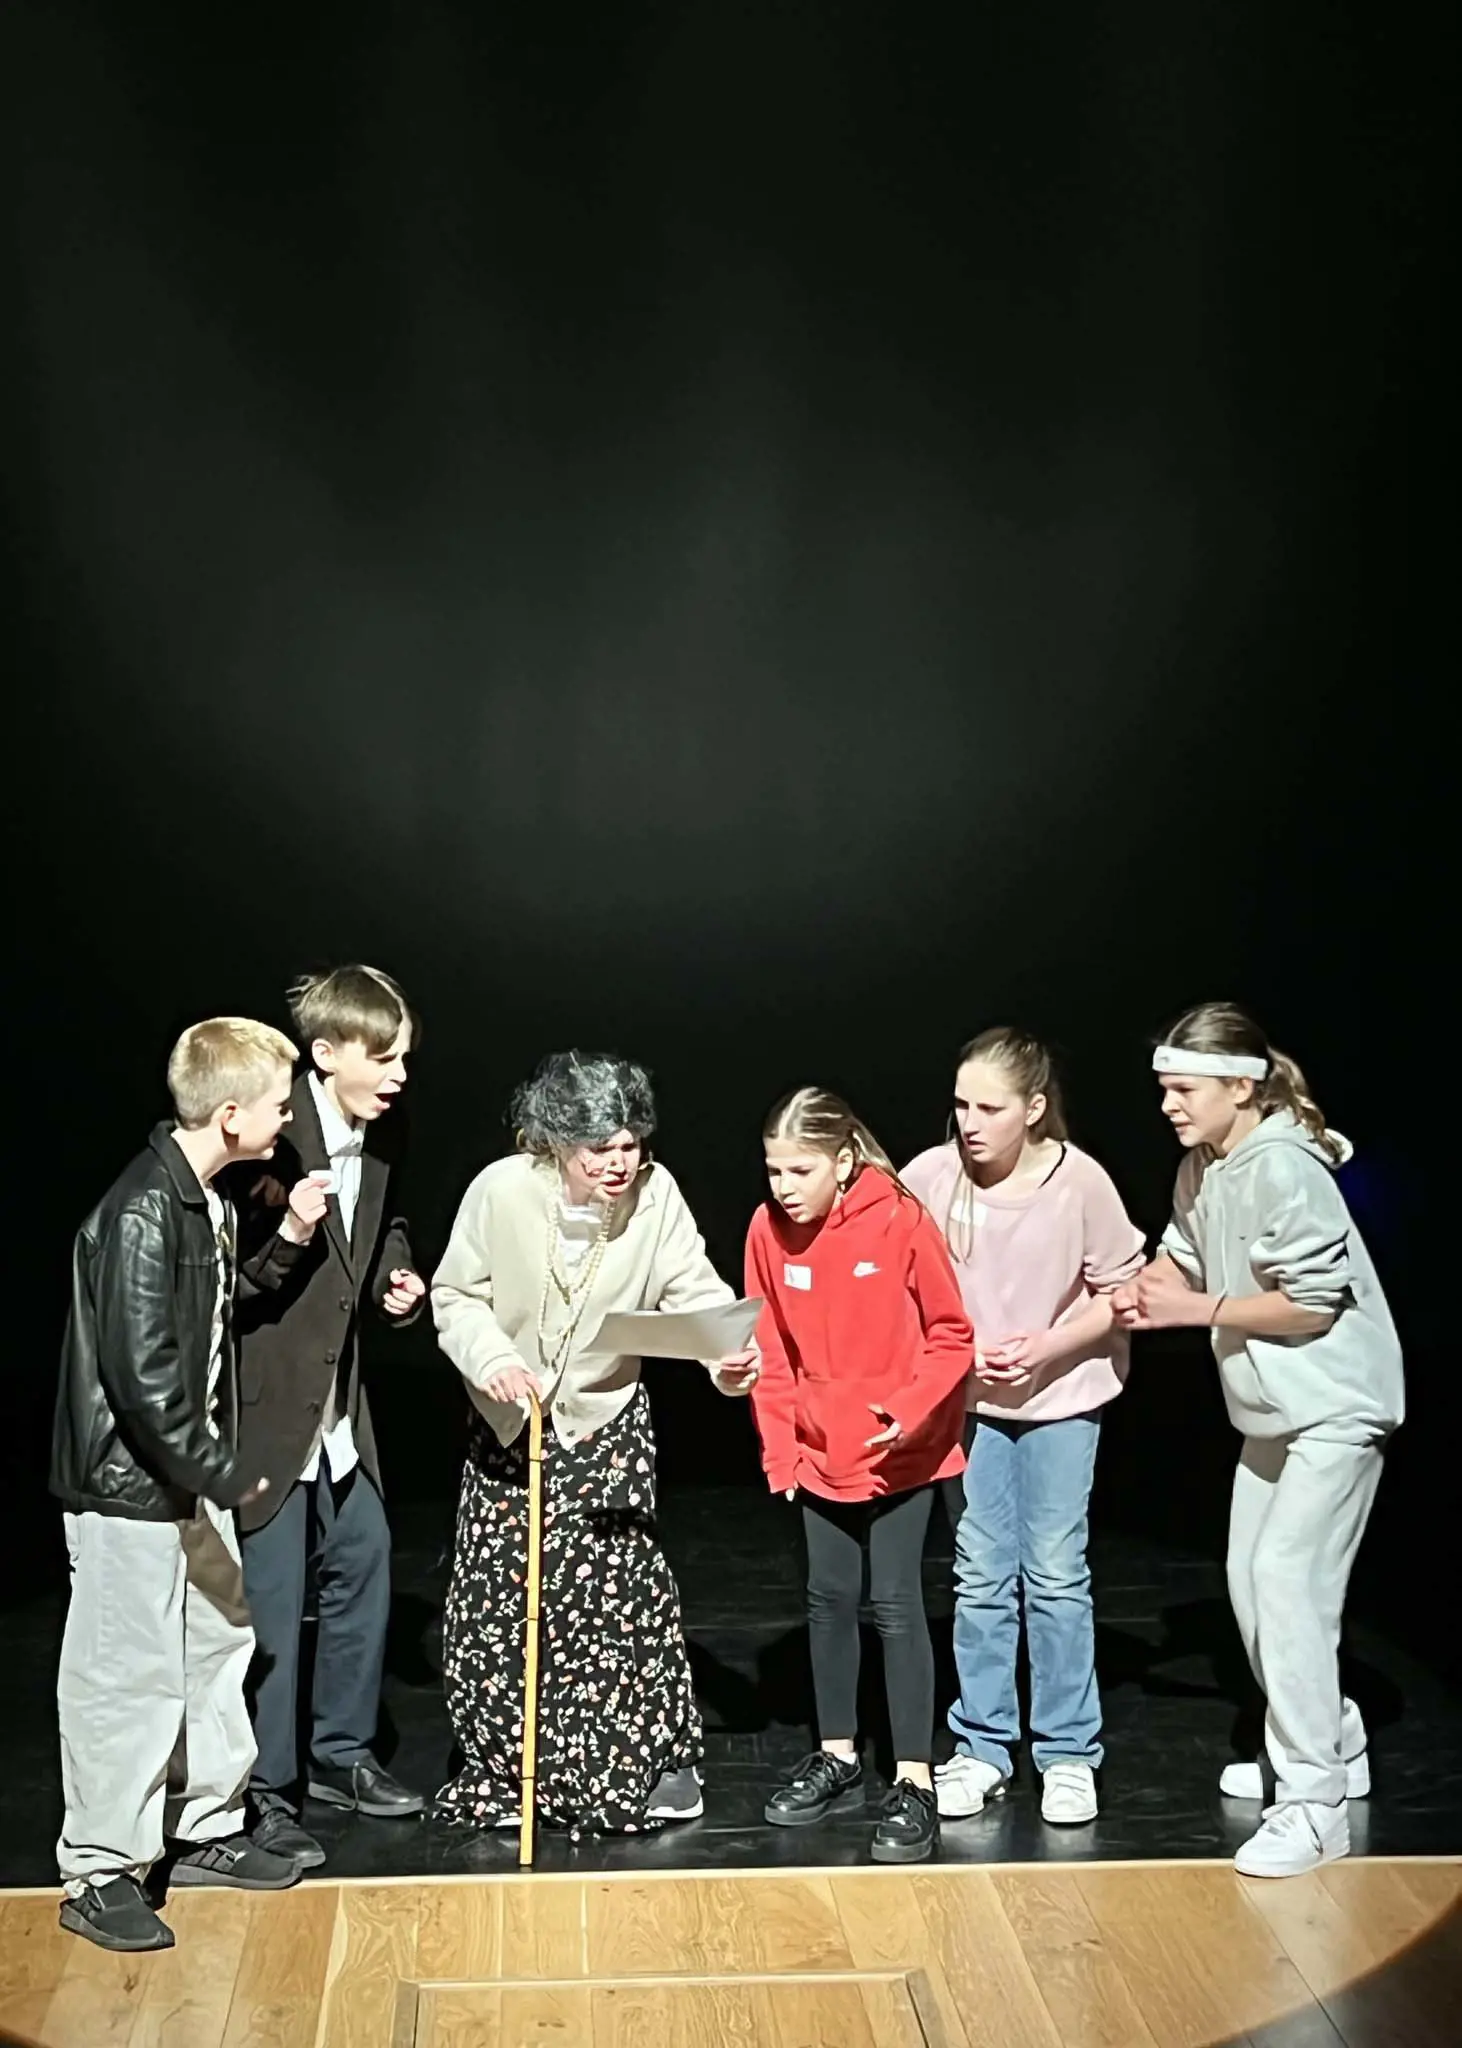 The Ibstock Place School House Drama Competition was a storming success across the Houses. Montefiore House won with Rage to Riches, written and directed by Emily and assisted by Sadie. 